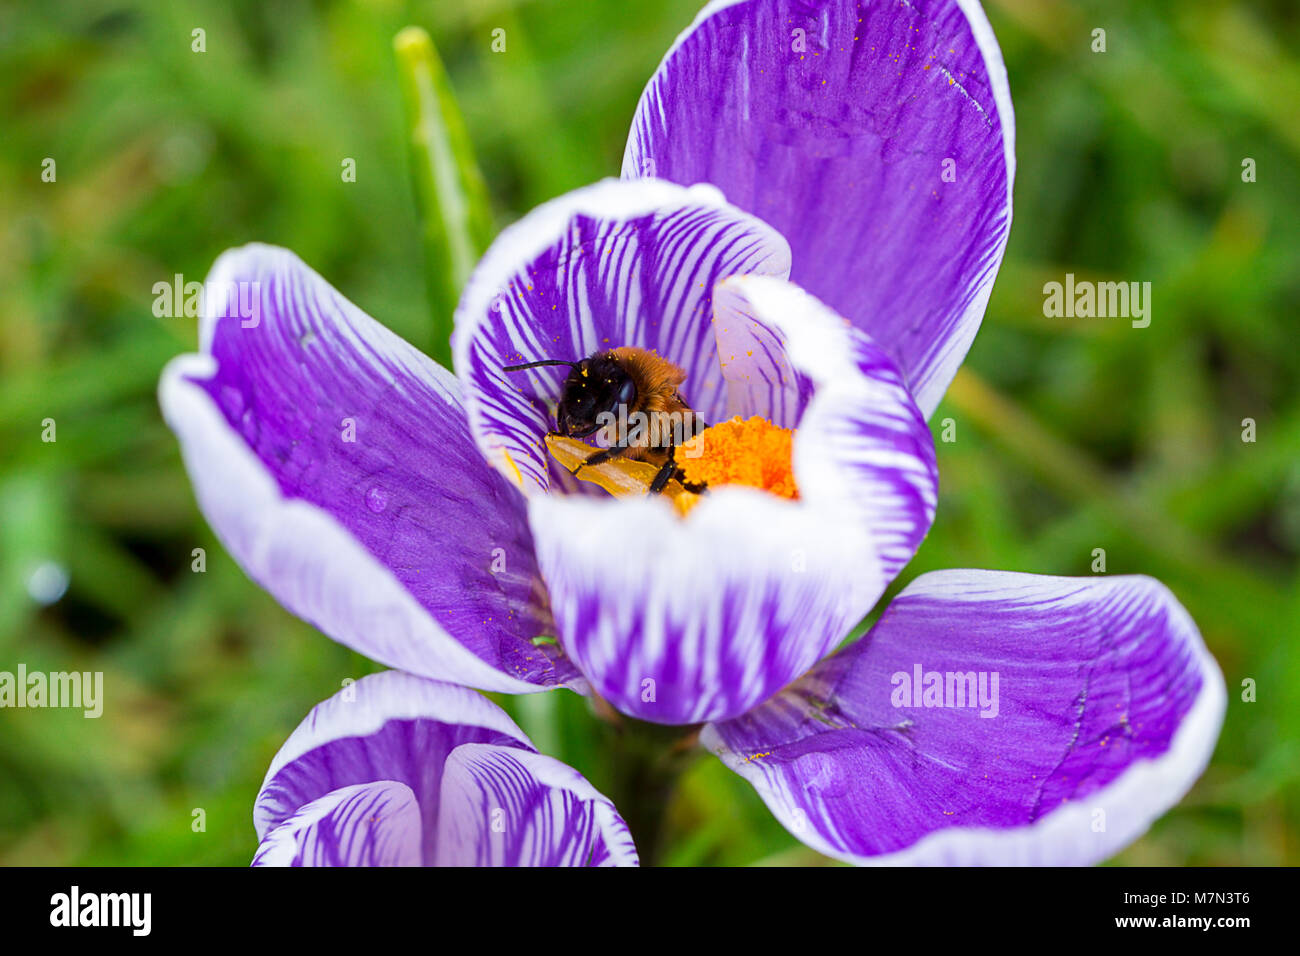 A bee pollinating a blooming Striped Pickwick Crocus flower.  England, UK  Crocus flowers are considered to be a harbinger of Spring. Stock Photo